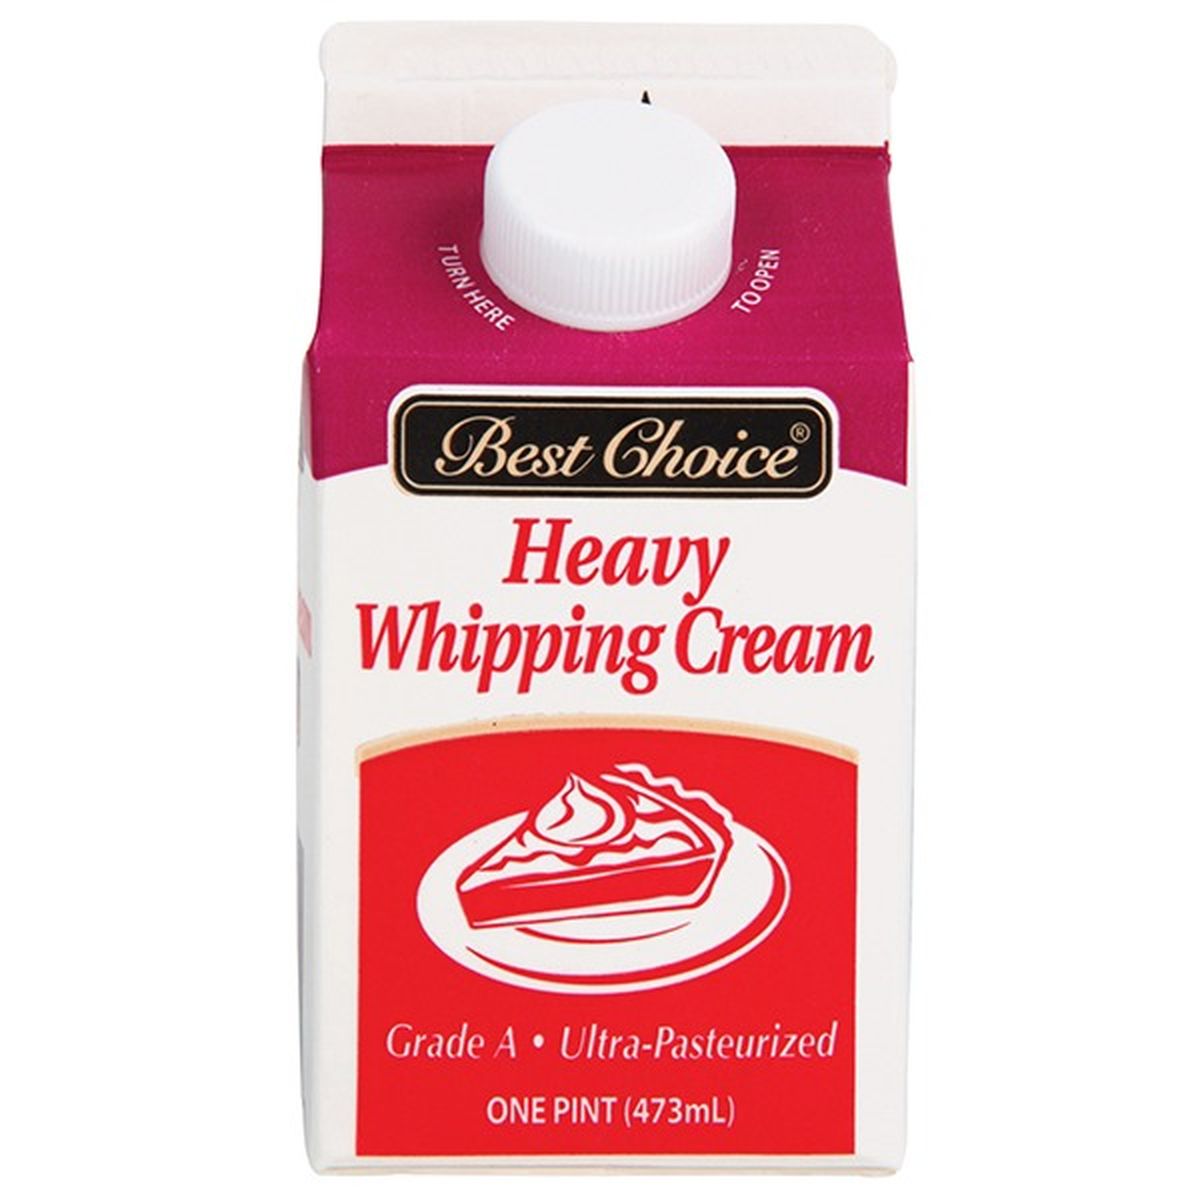 Best Choice Heavy Whipping Cream (1 pt) Delivery or Pickup Near Me